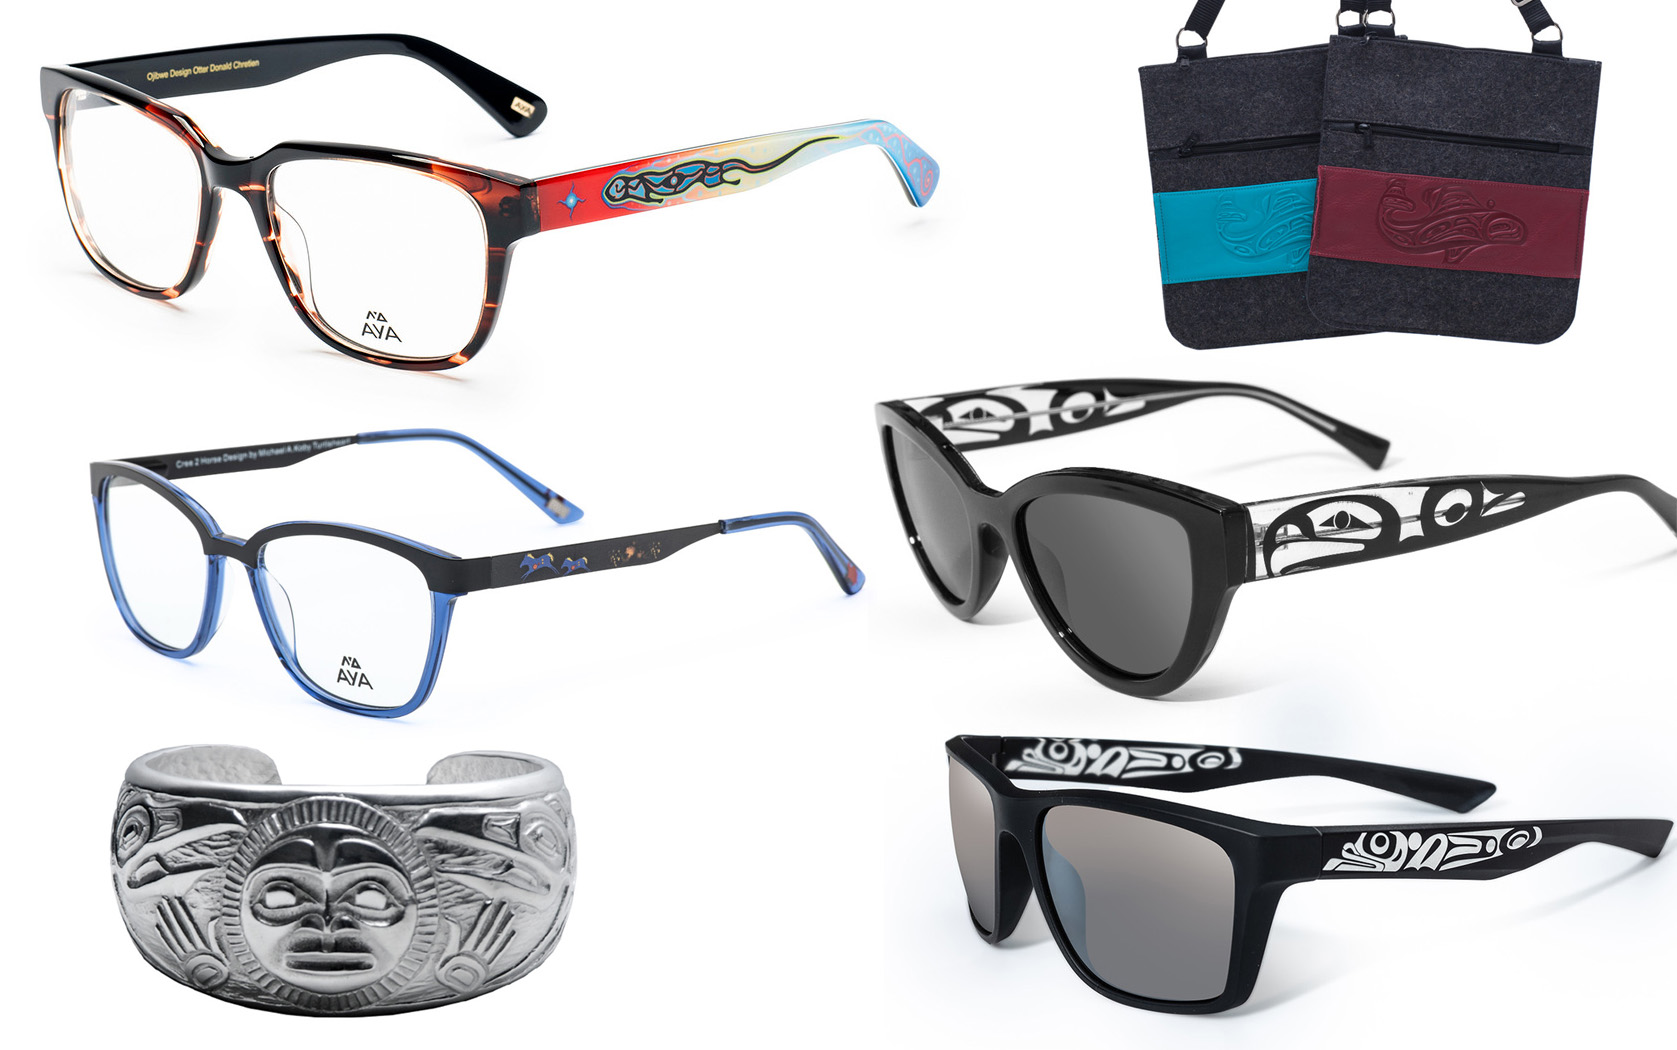 PHotos of several different AYA products including eye glasses, sun glasses, handbags, and jewelry. 